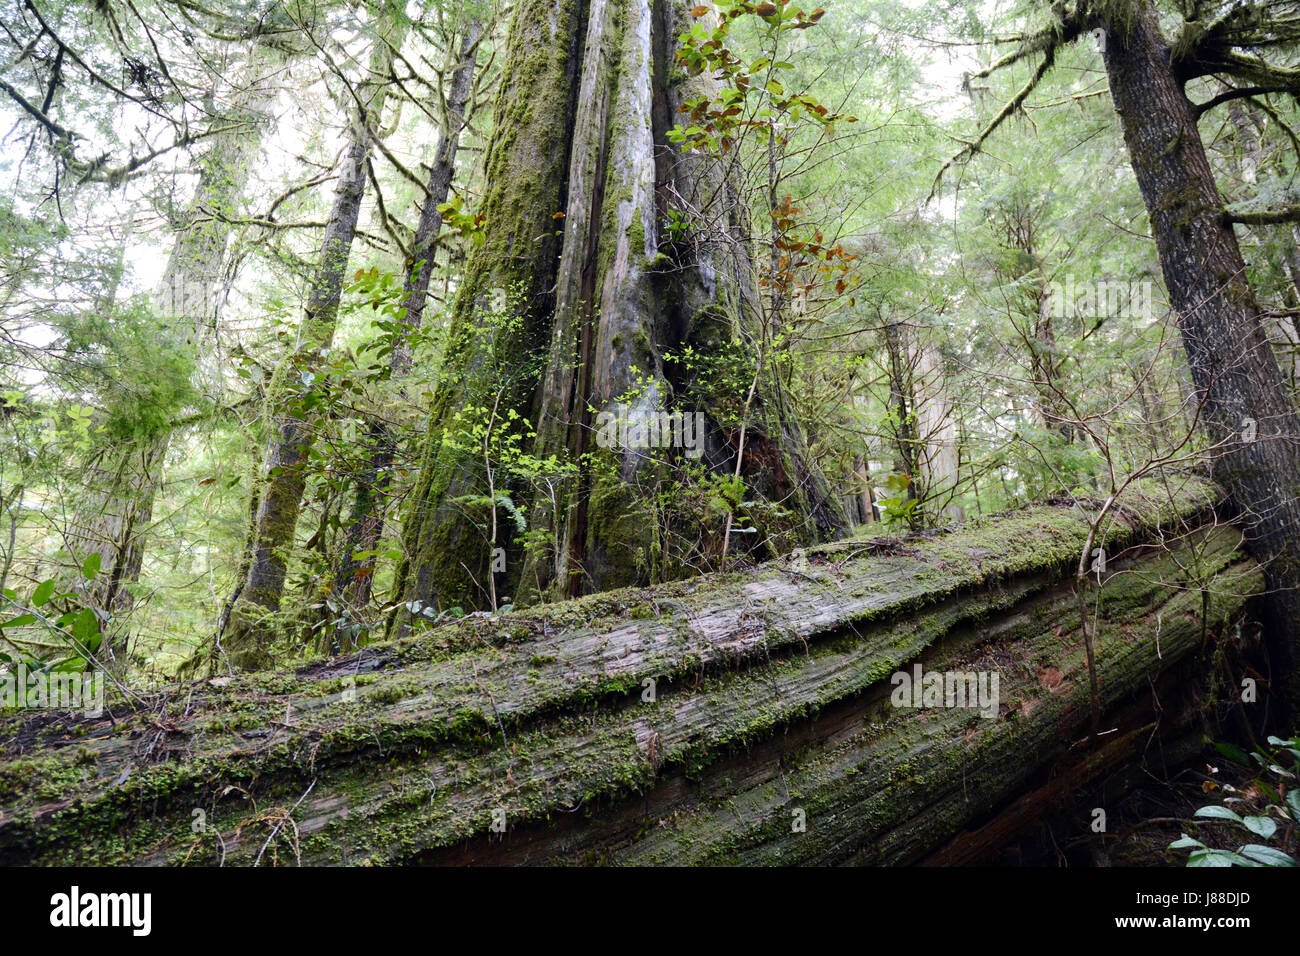 Mossy old growth western red cedar tree towers over a deadfall log in an ancient rainforest on Vancouver Island, British Columbia, Canada Stock Photo